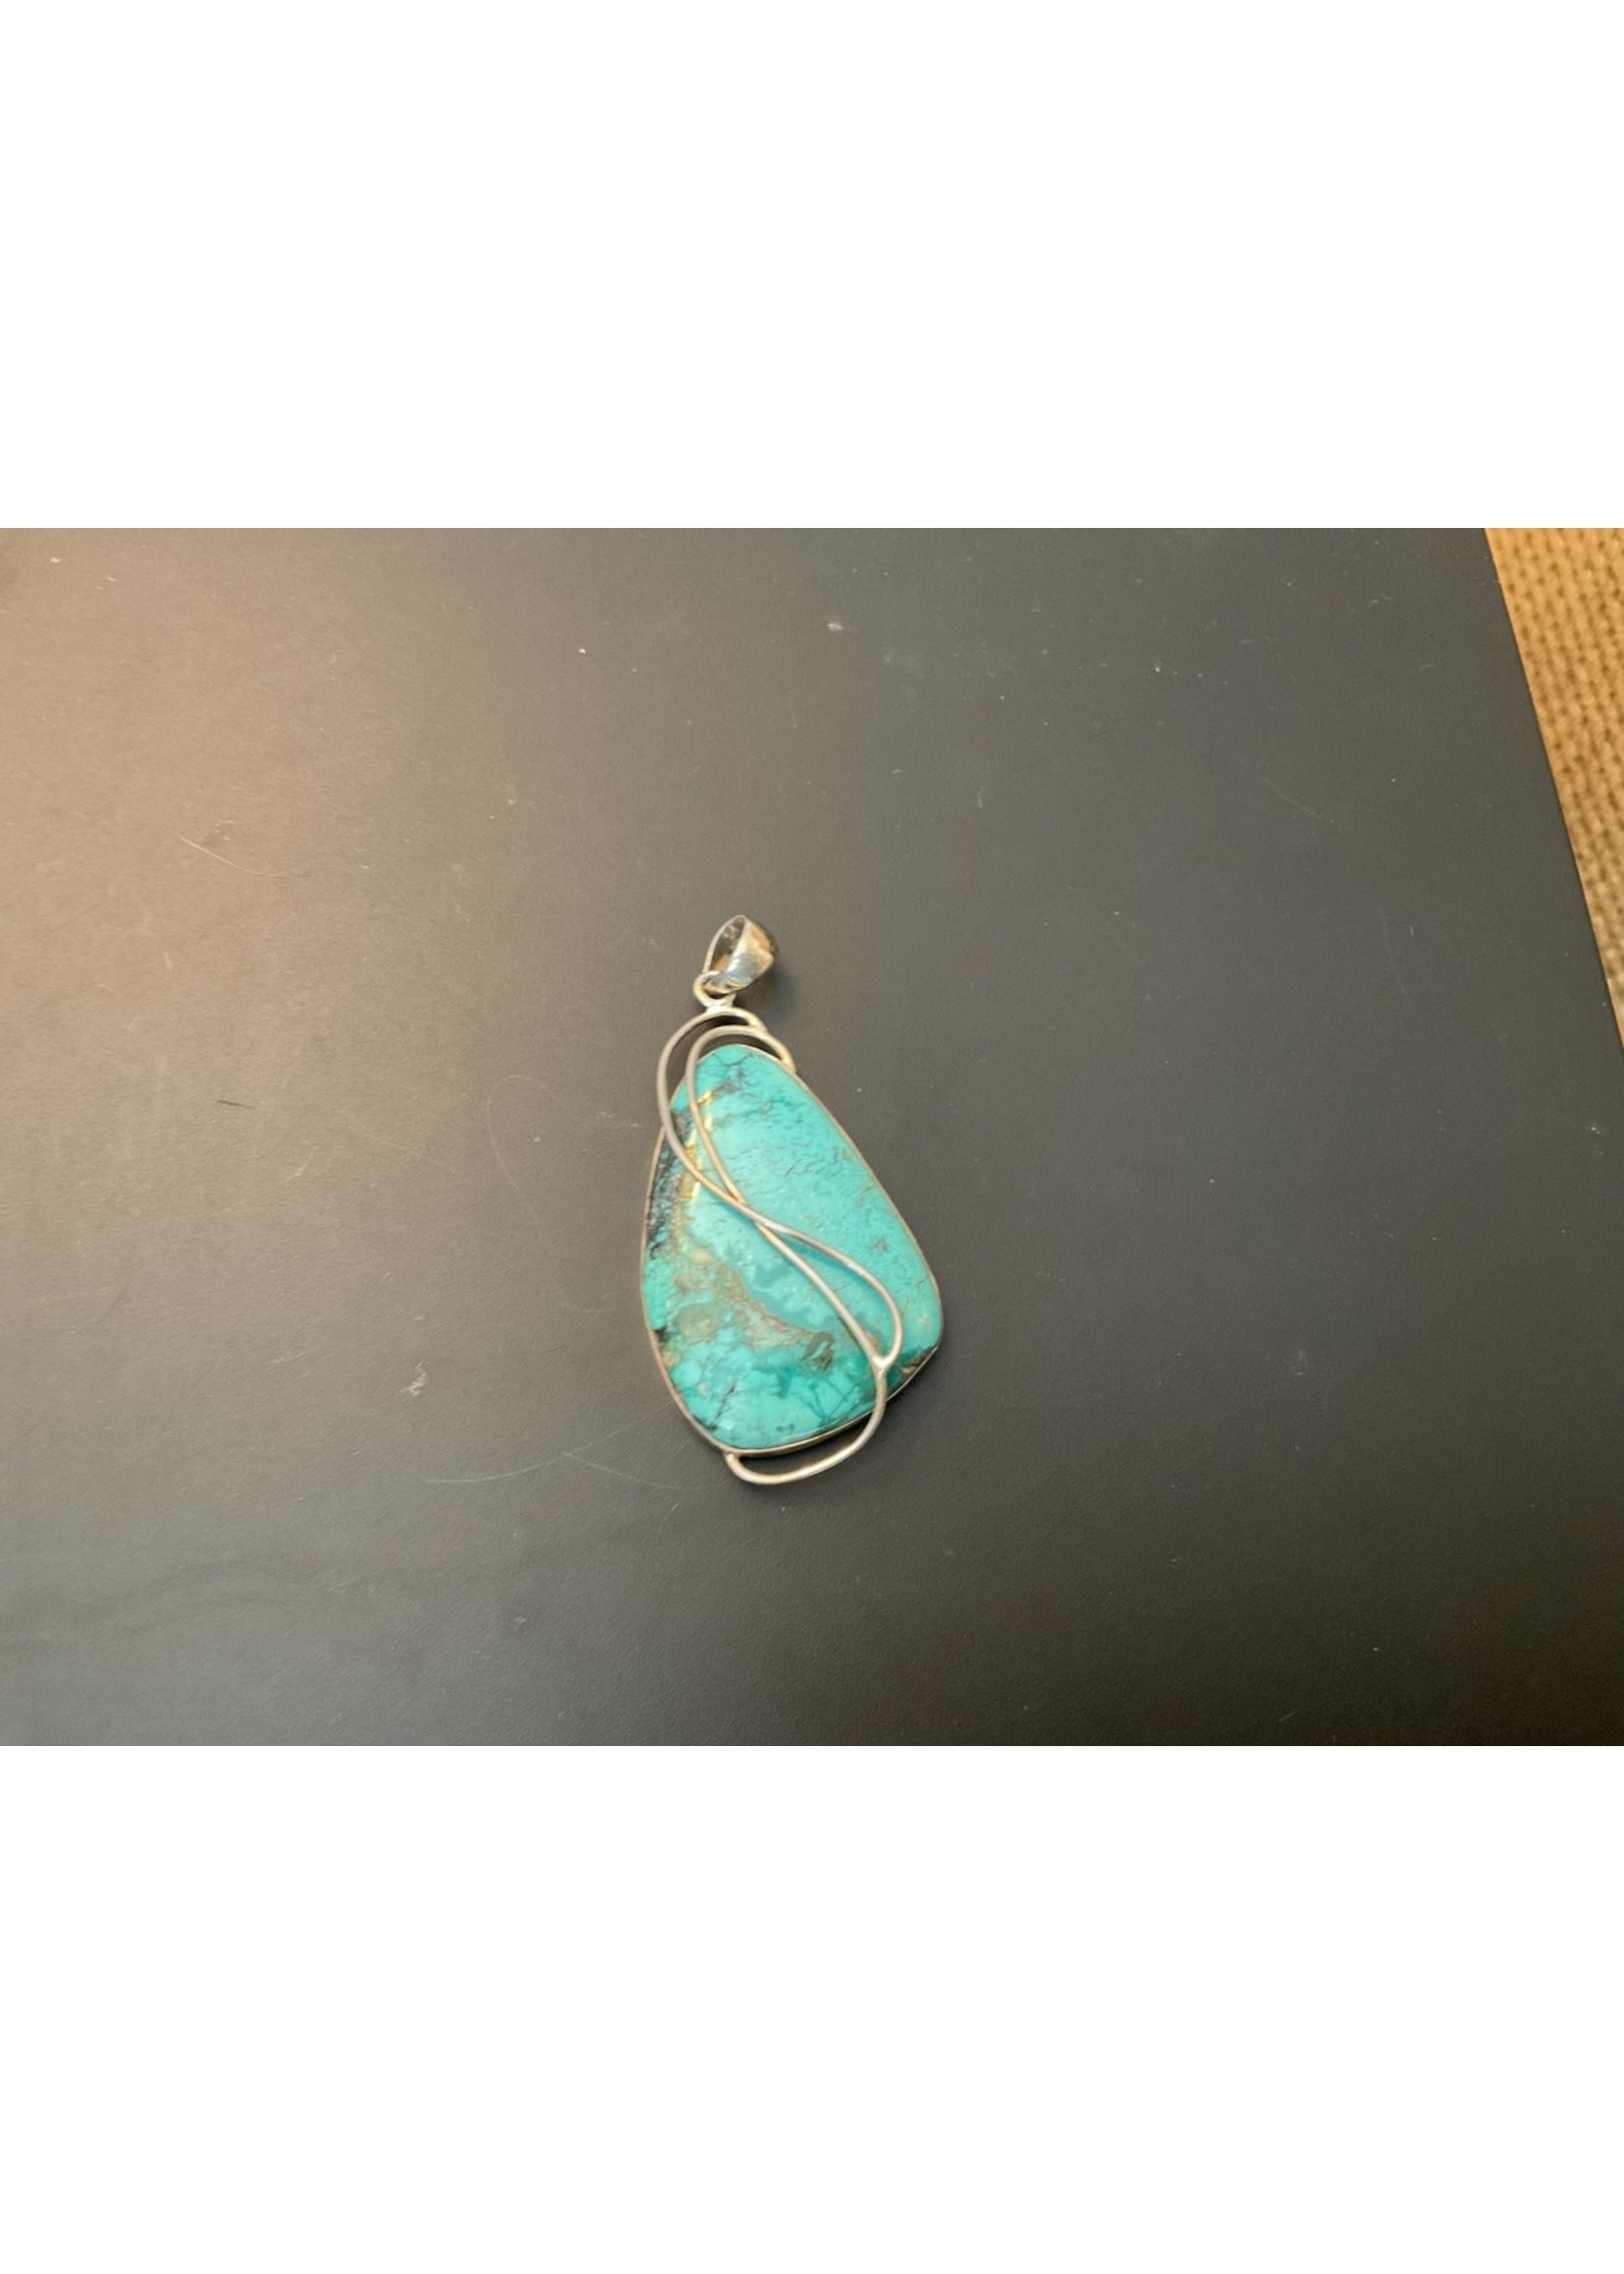 Turquoise Pendant set in Sterling Silver - 2 1/2”